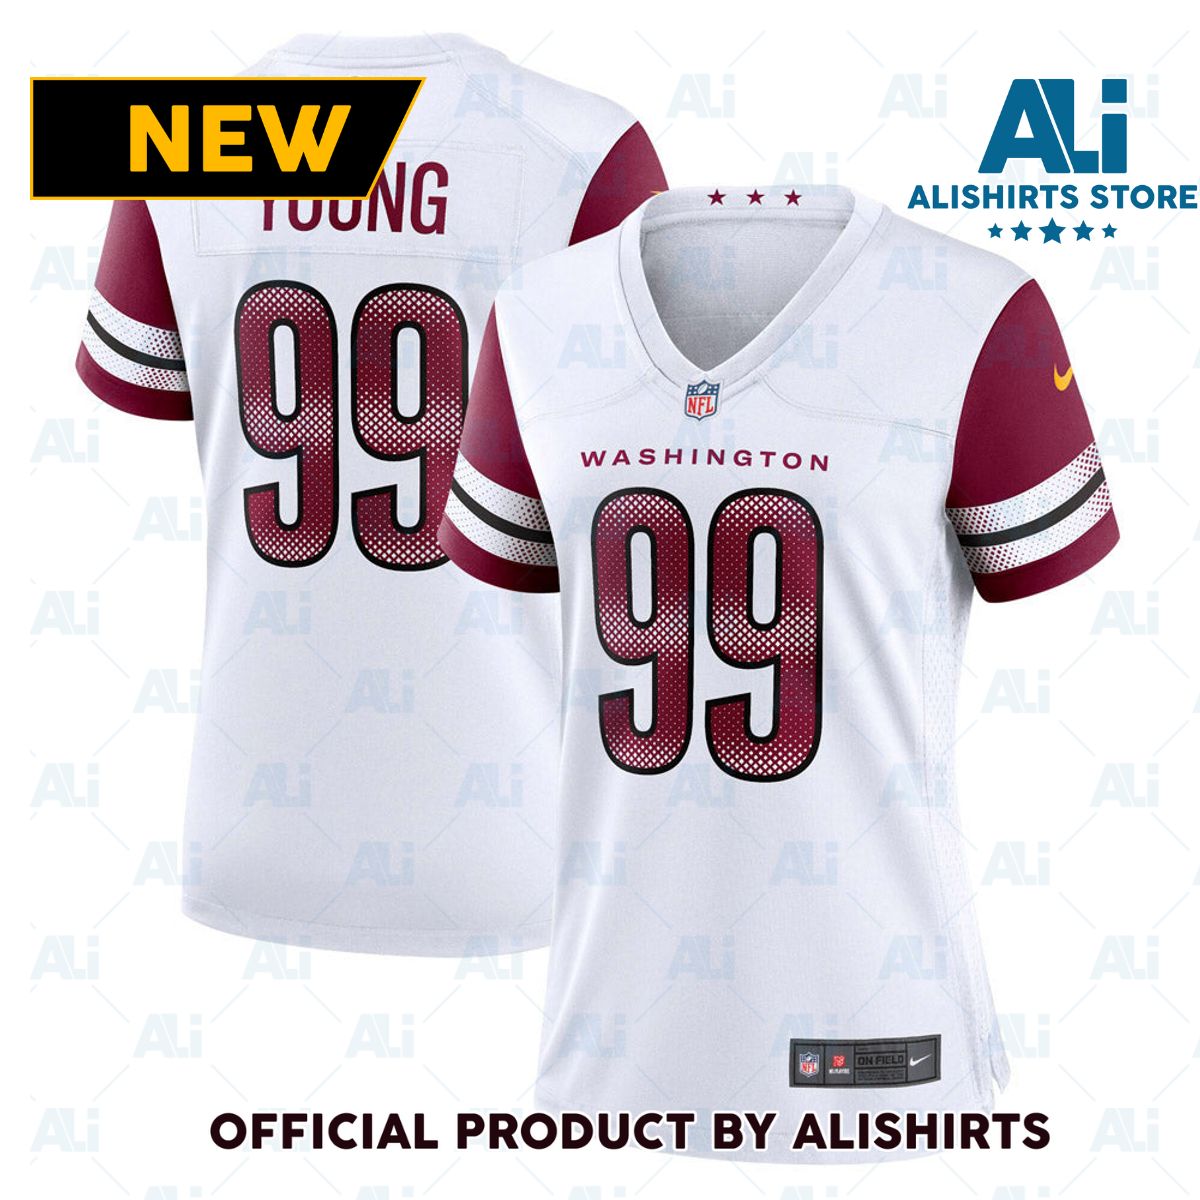 Washington Commanders Chase Young Game Football Jersey- White